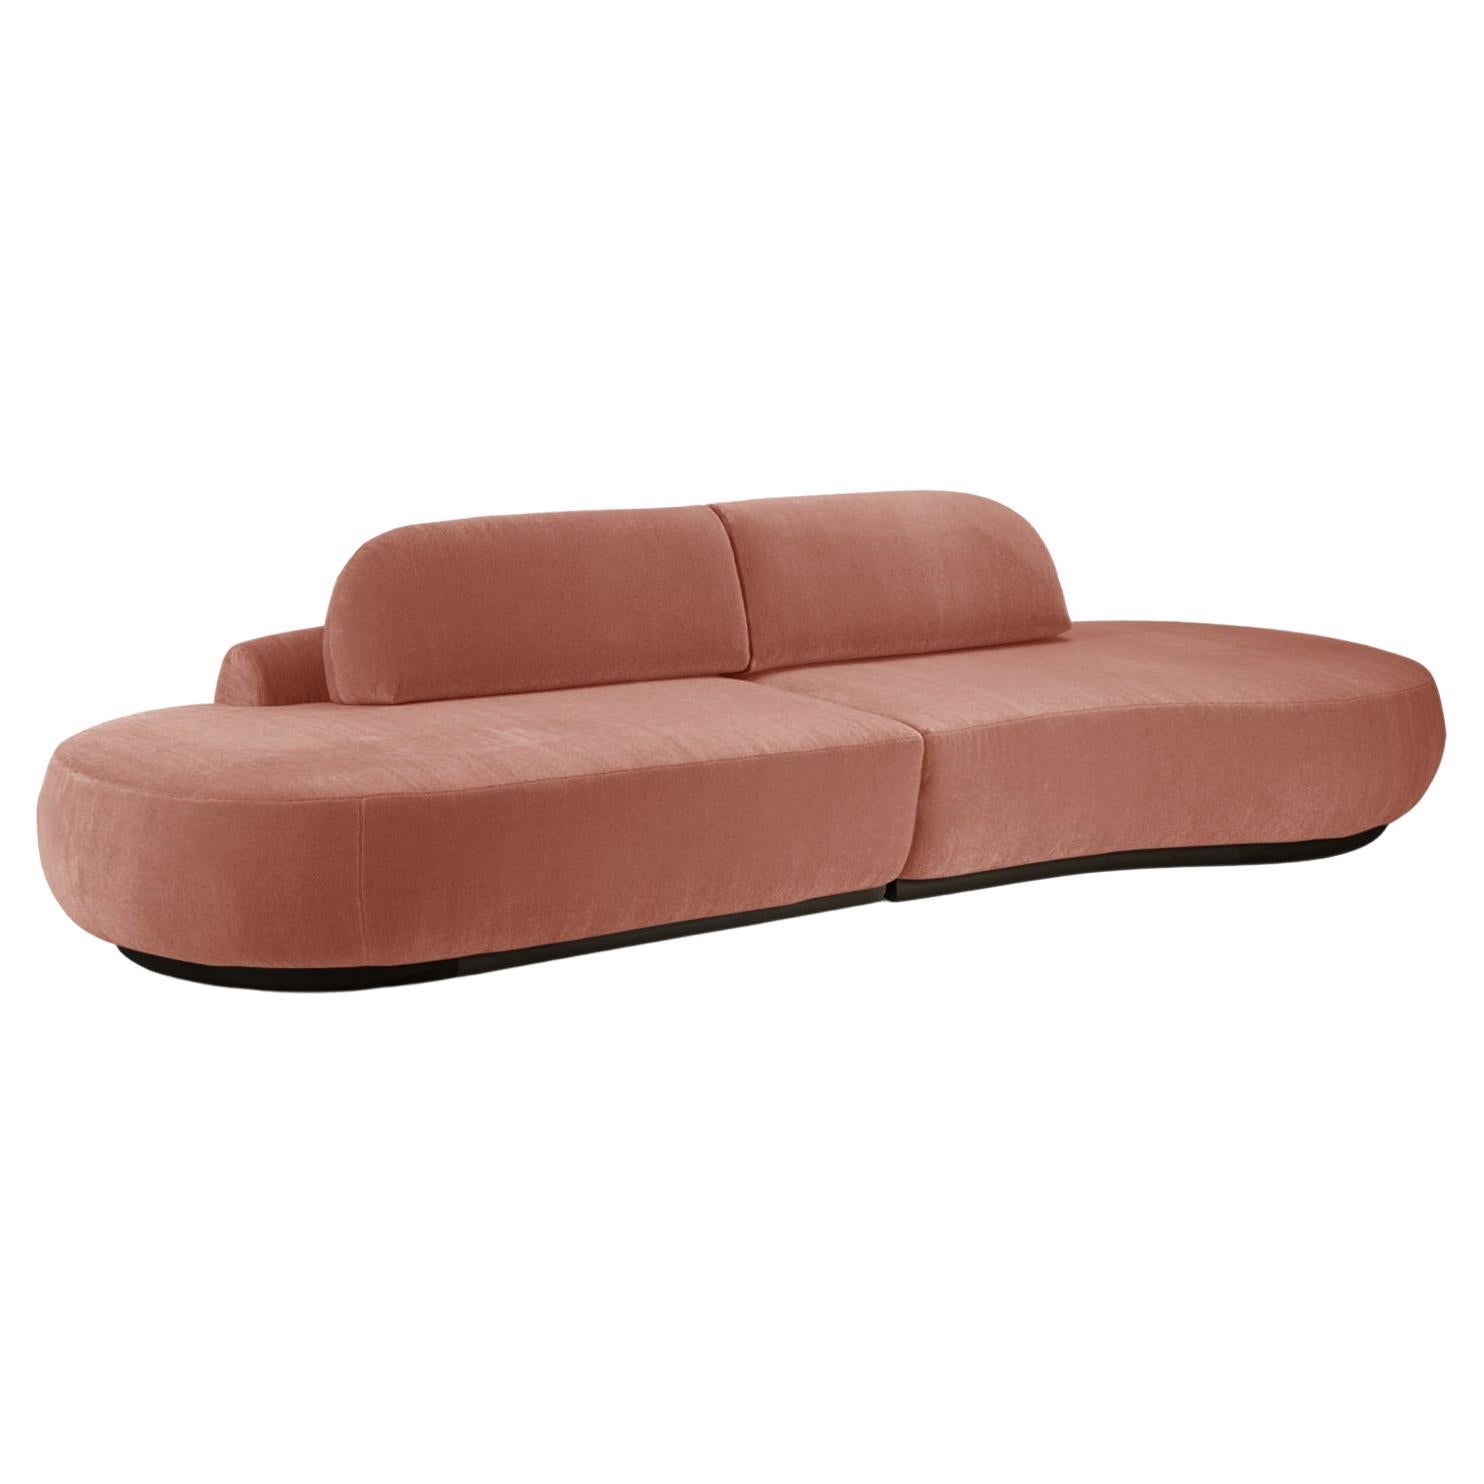 Naked Curved Sectional Sofa, 2 Piece with Beech Ash-056-5 and Paris Brick